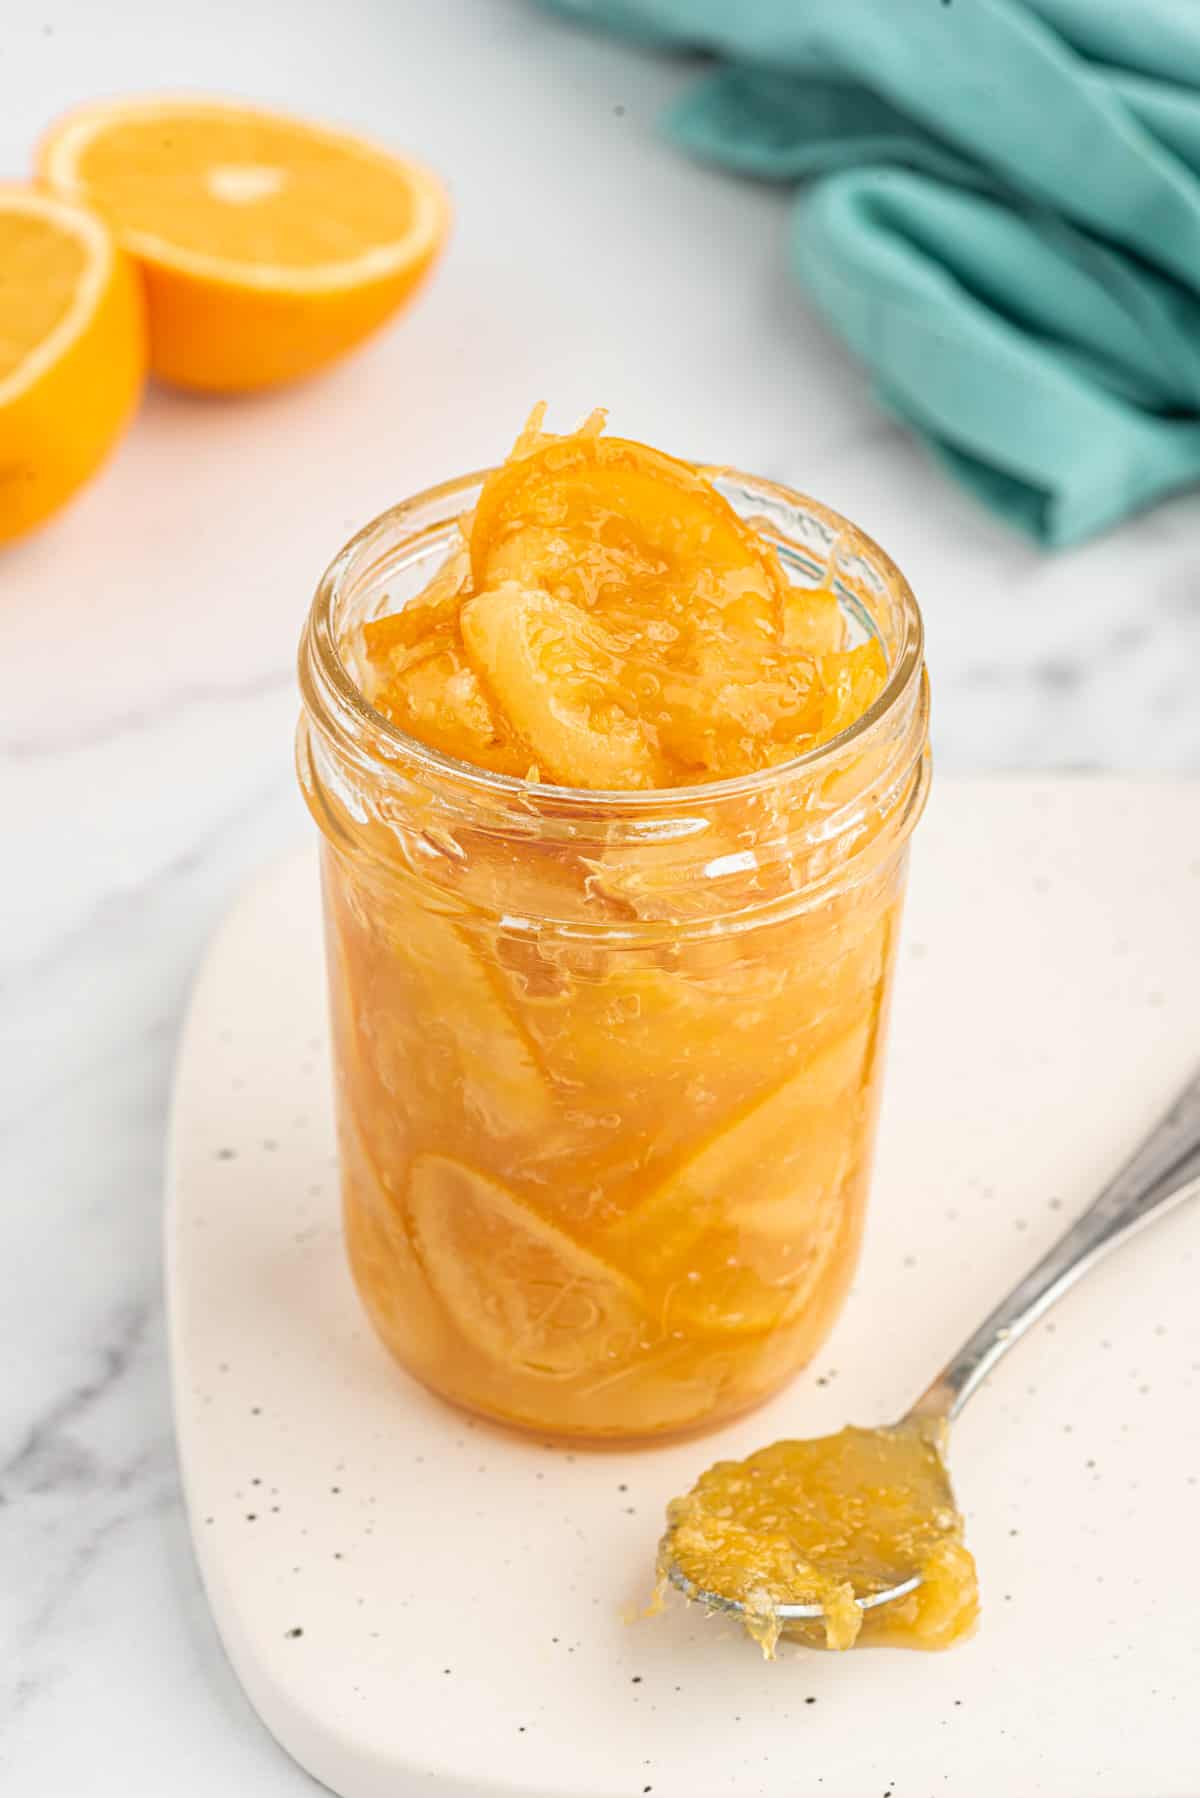 A spoon is sitting next to an open jar of orange marmalade.